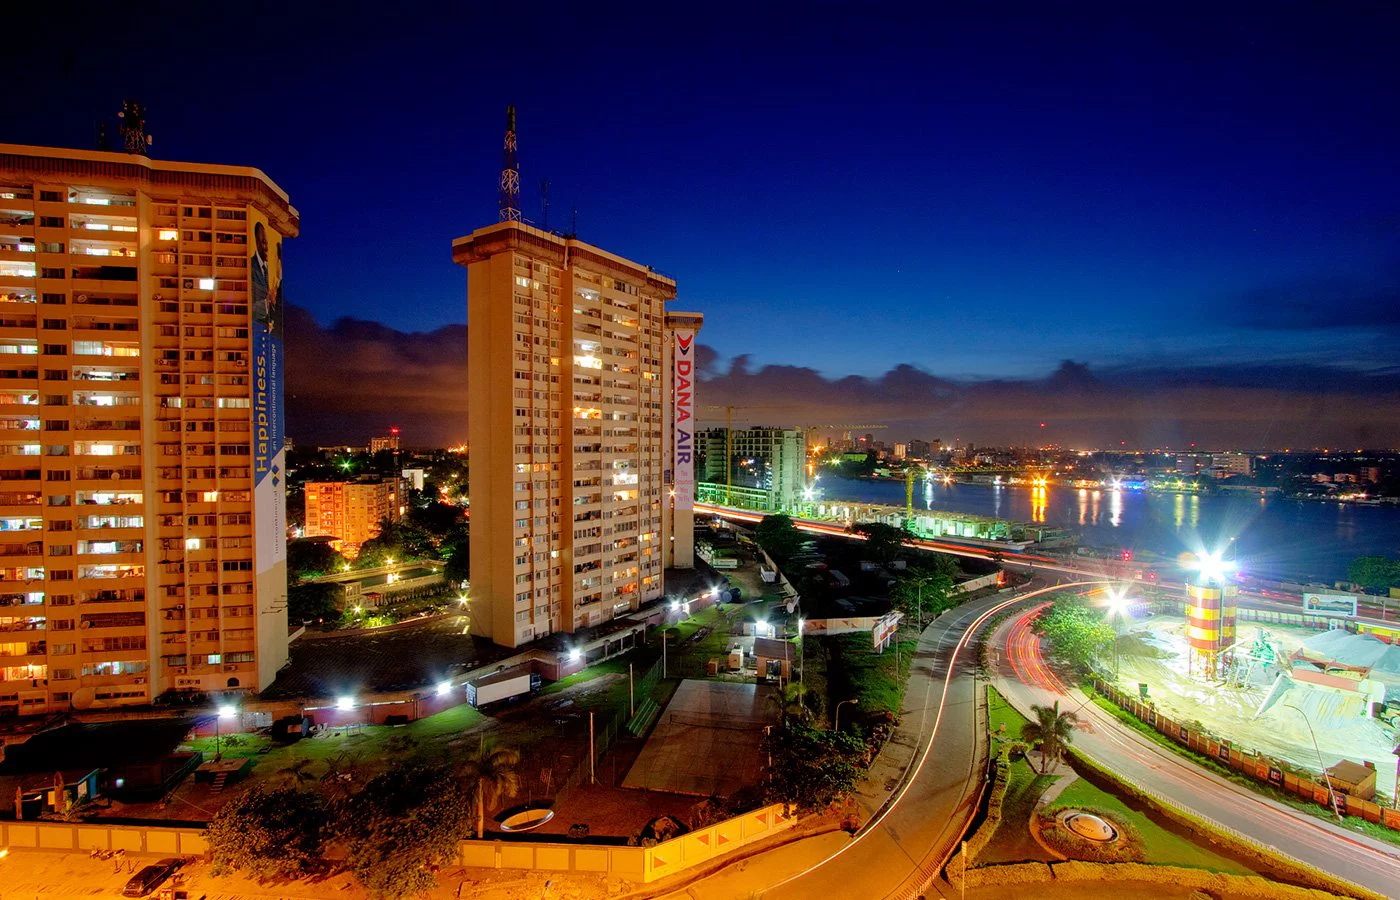 lagos african cities at night